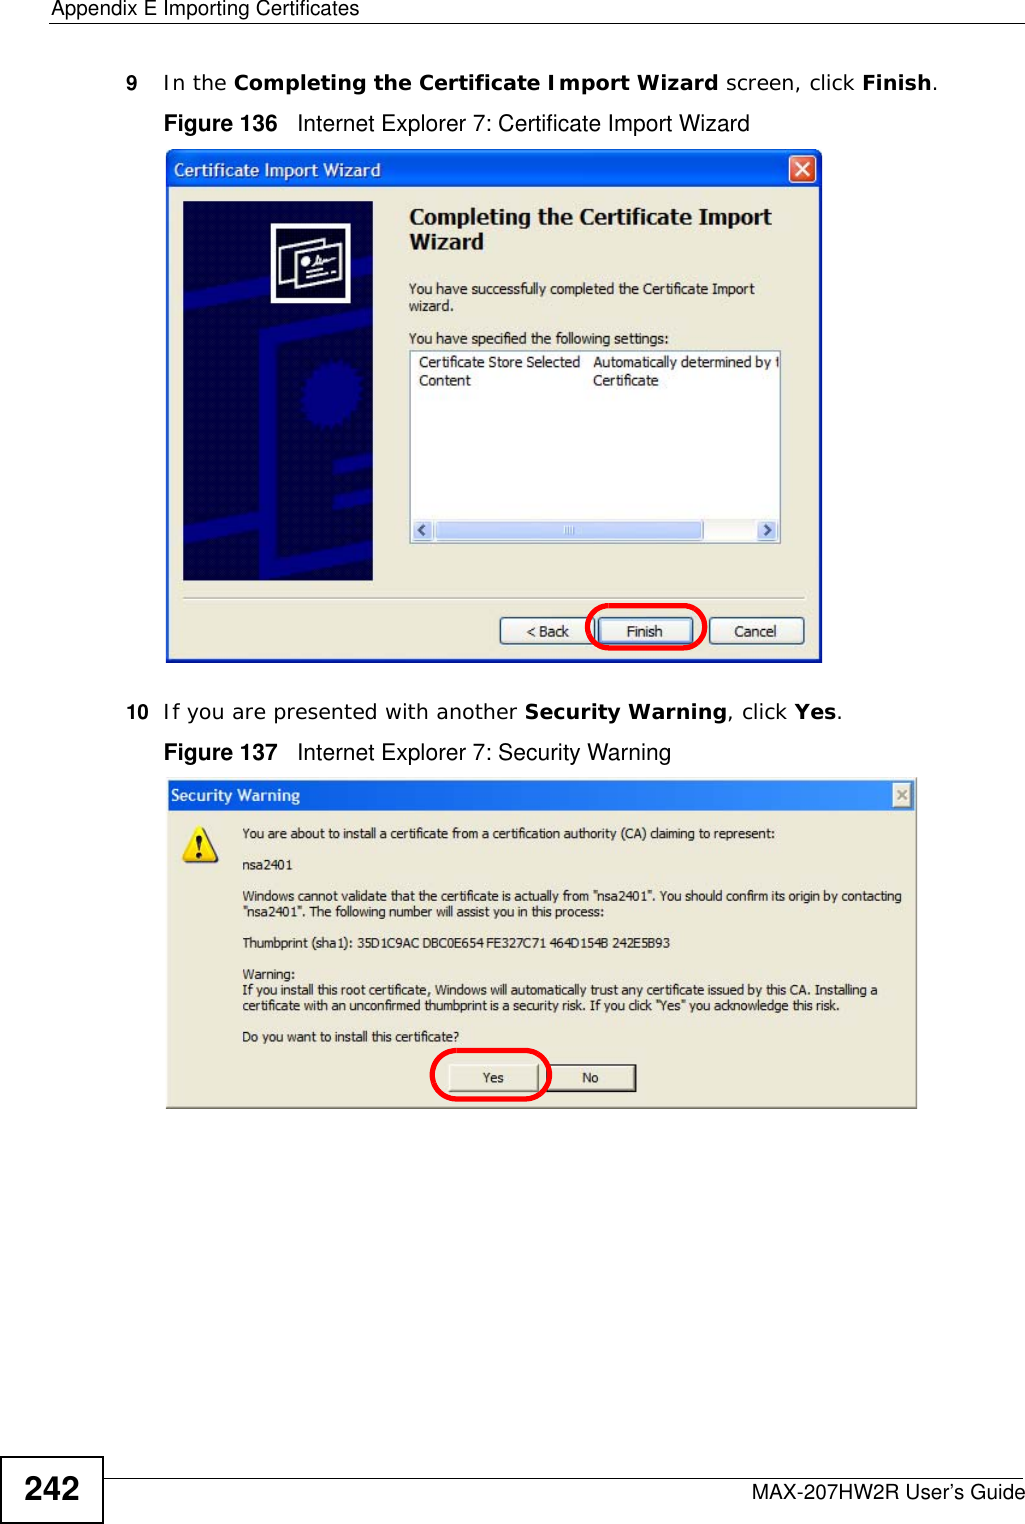 Appendix E Importing CertificatesMAX-207HW2R User’s Guide2429In the Completing the Certificate Import Wizard screen, click Finish.Figure 136   Internet Explorer 7: Certificate Import Wizard10 If you are presented with another Security Warning, click Yes.Figure 137   Internet Explorer 7: Security Warning